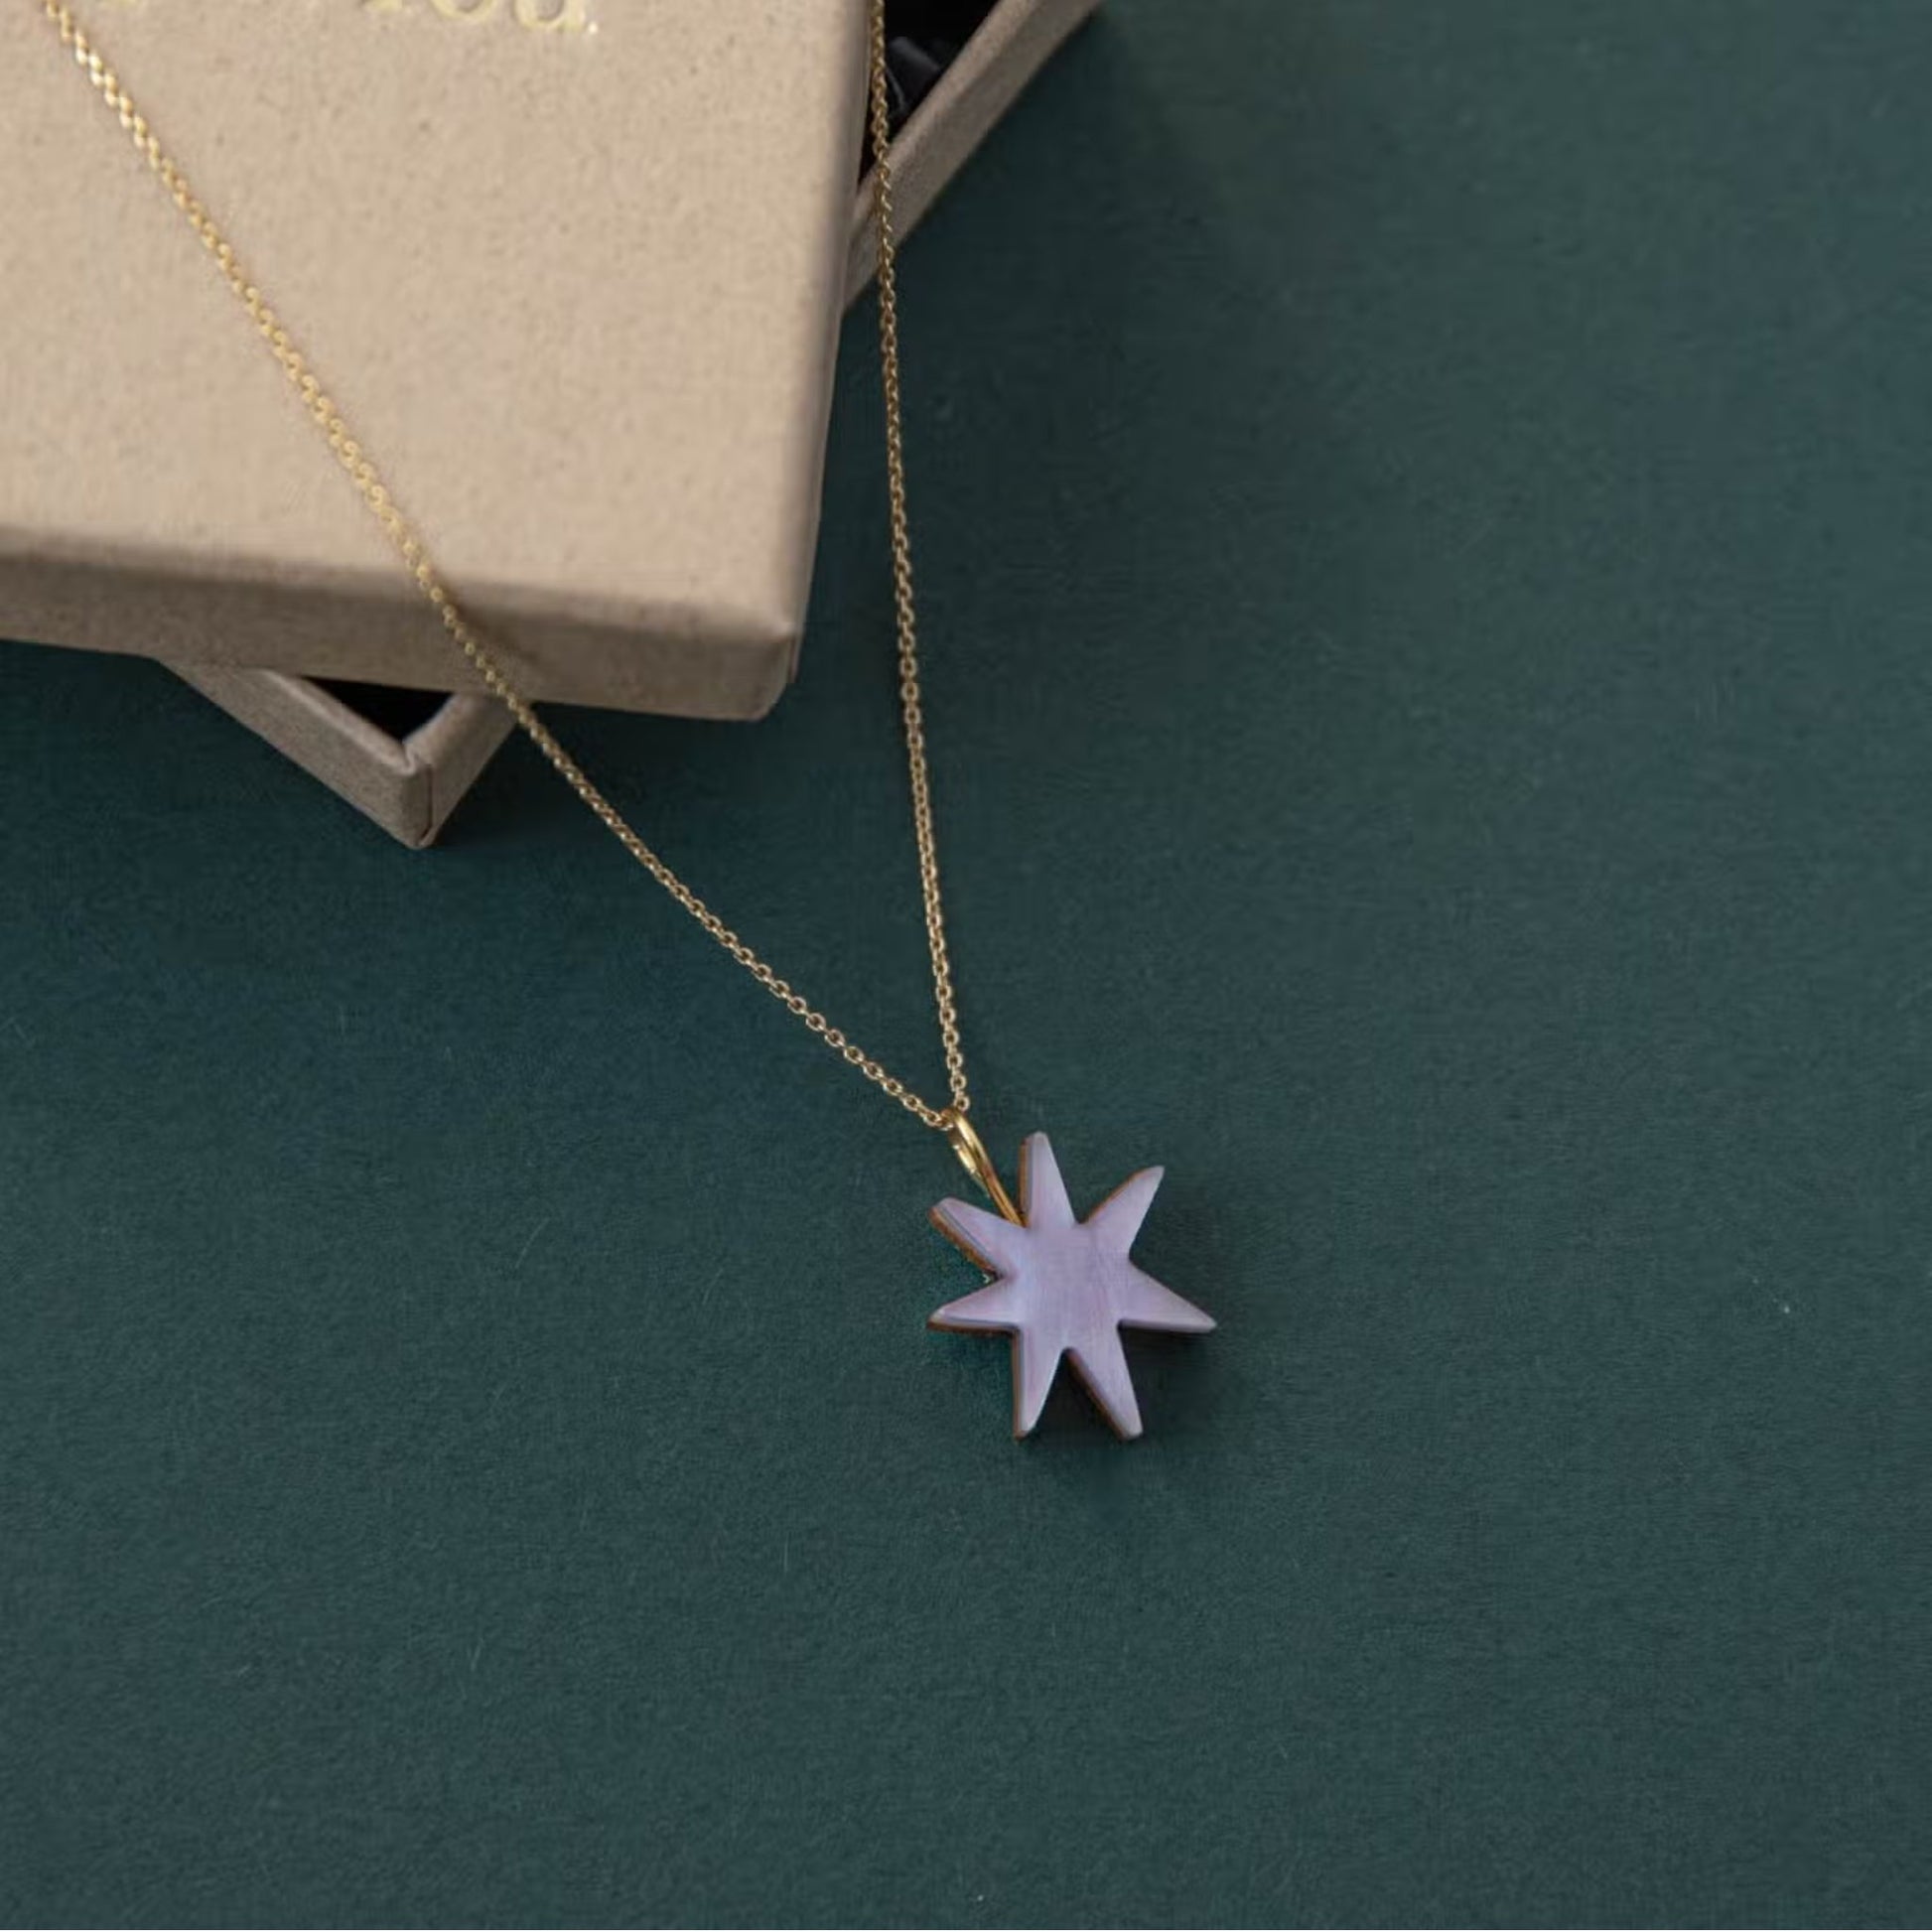 Hand Drawn Star Gold Necklace in Lilac Marble - The Little Jewellery Company